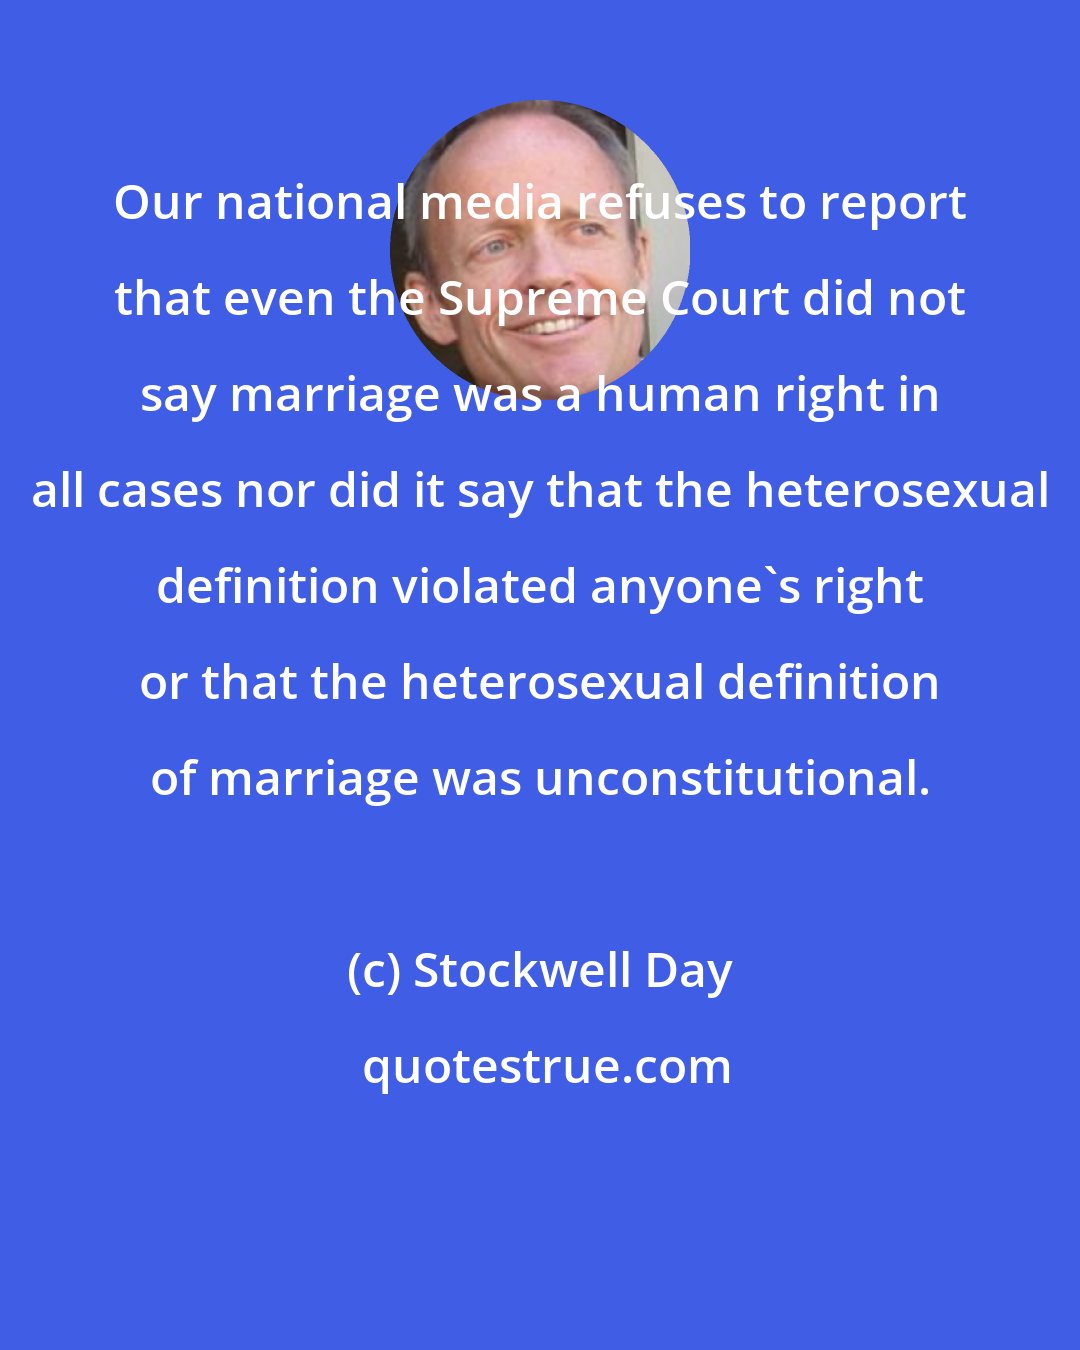 Stockwell Day: Our national media refuses to report that even the Supreme Court did not say marriage was a human right in all cases nor did it say that the heterosexual definition violated anyone's right or that the heterosexual definition of marriage was unconstitutional.